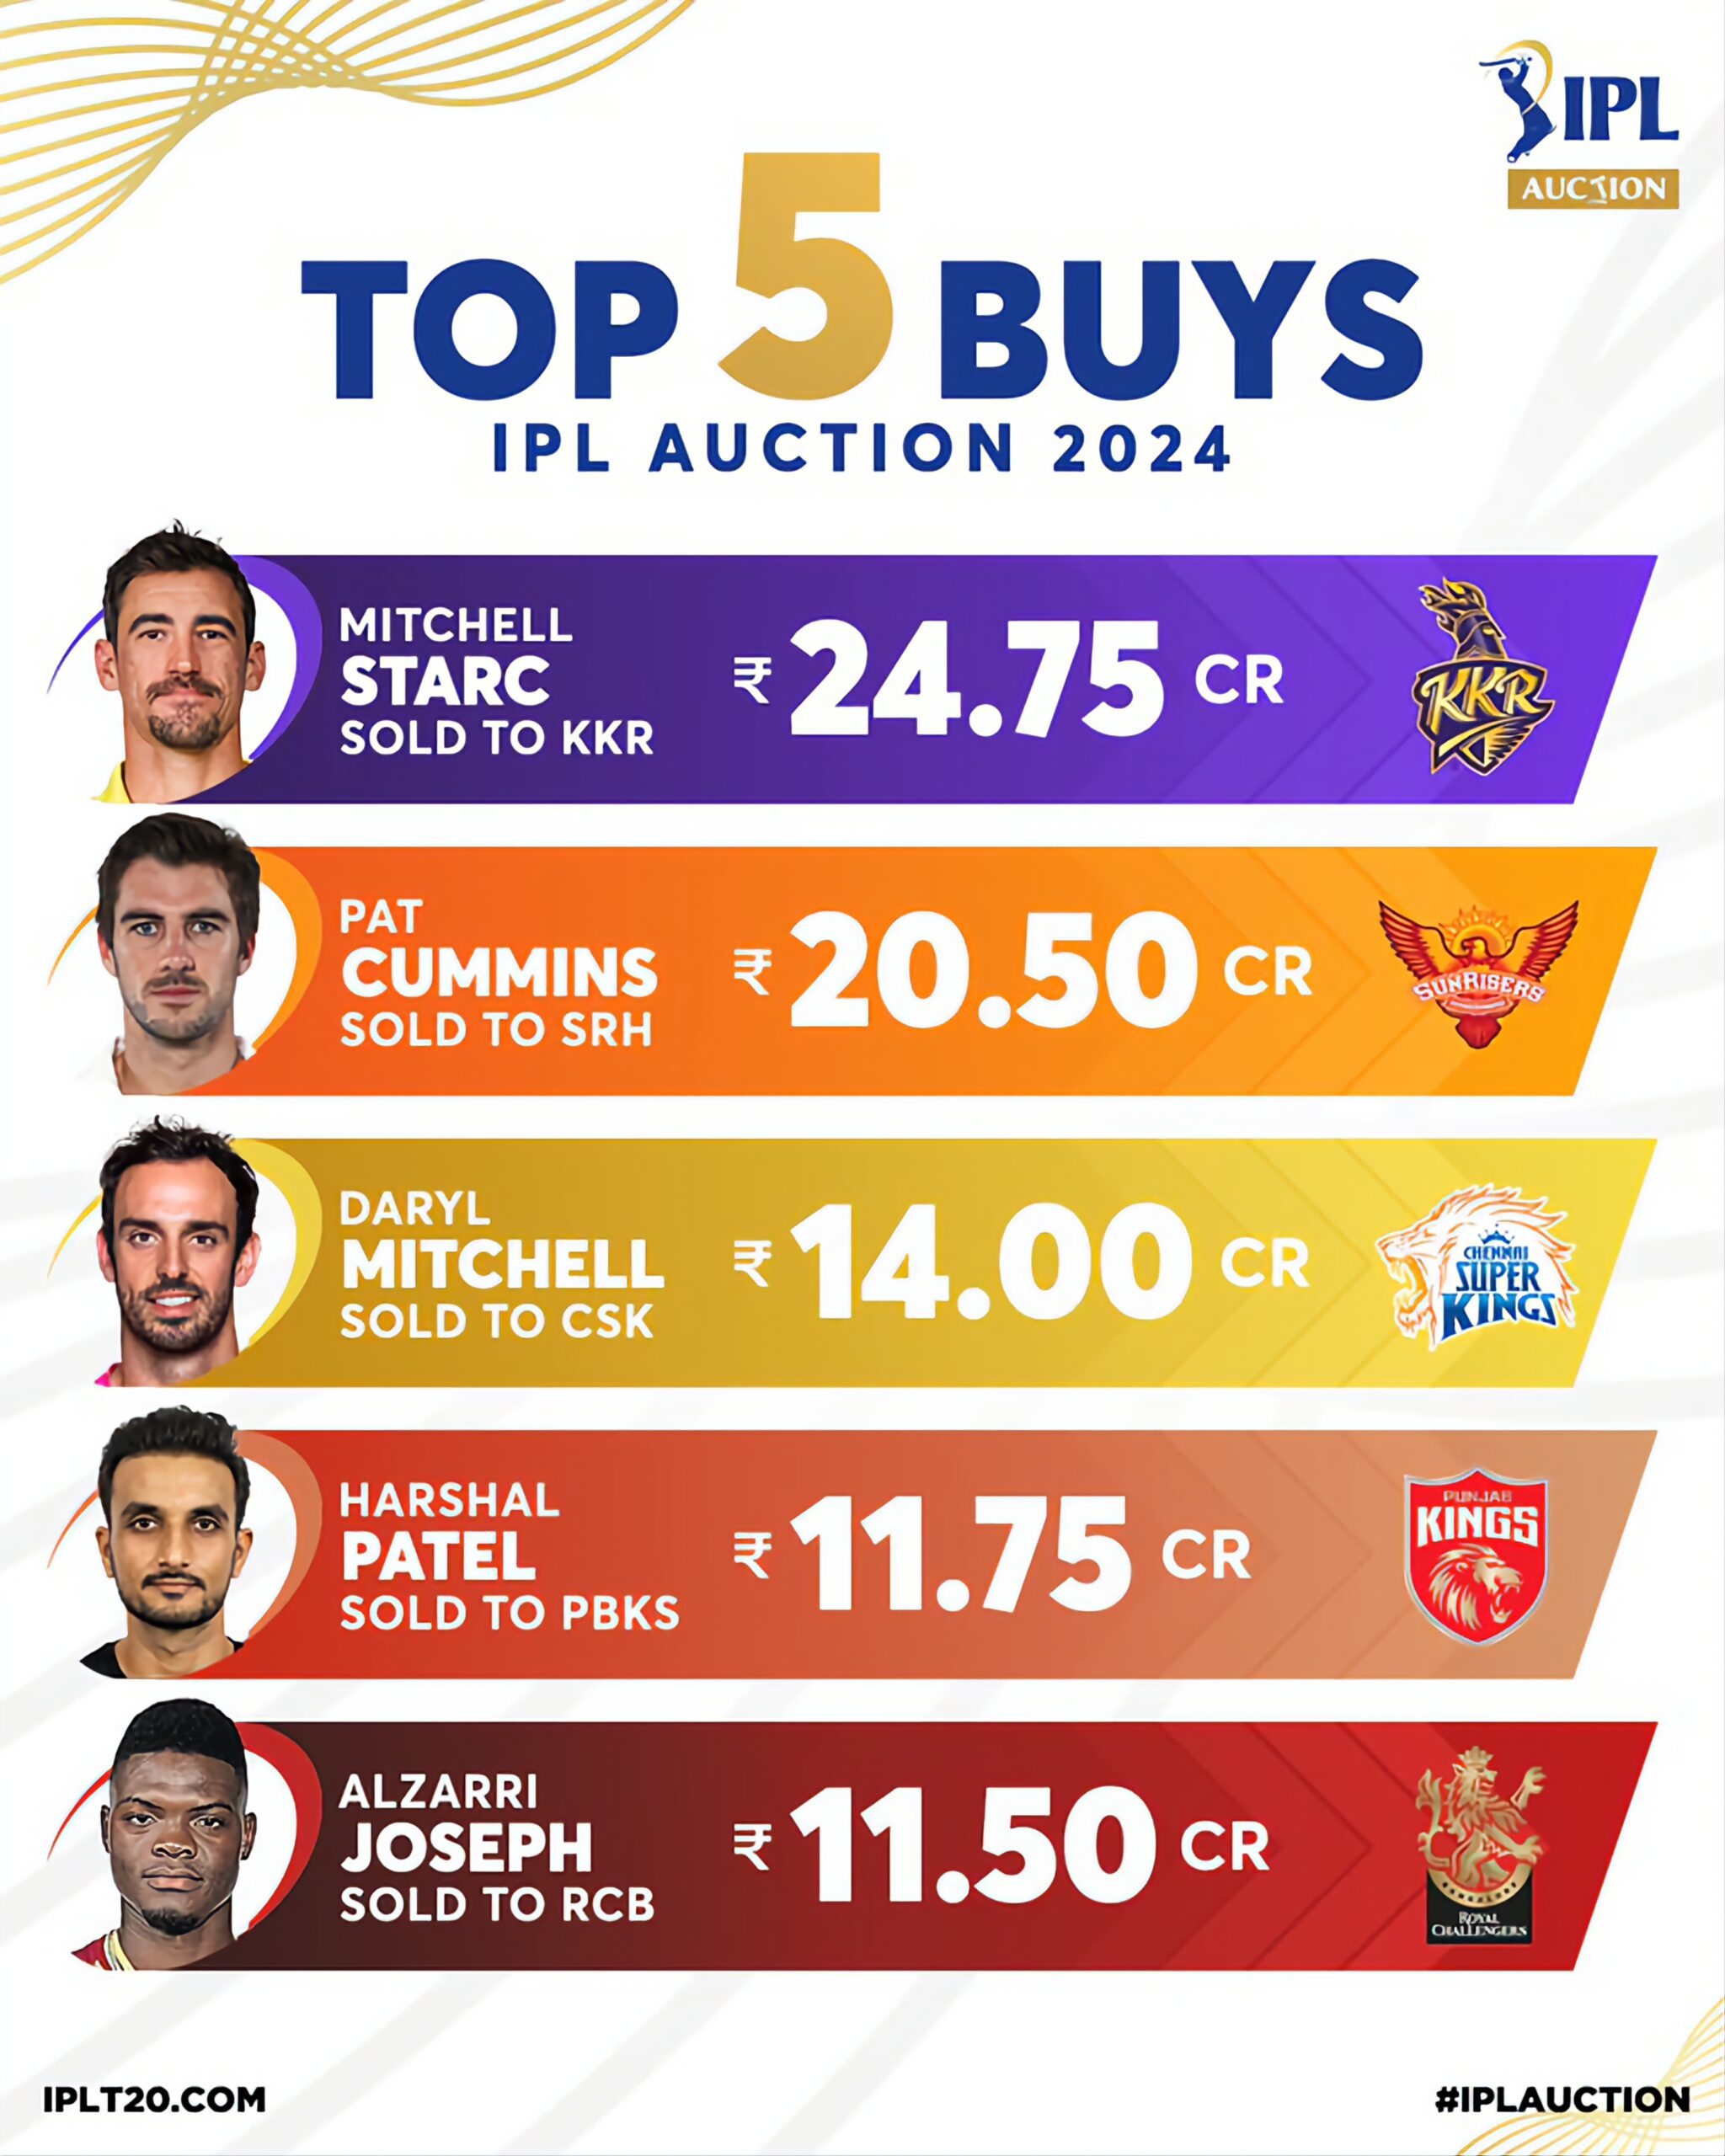 Ipl auction five most expensive players 2024 ये हैं ipl auction 2024